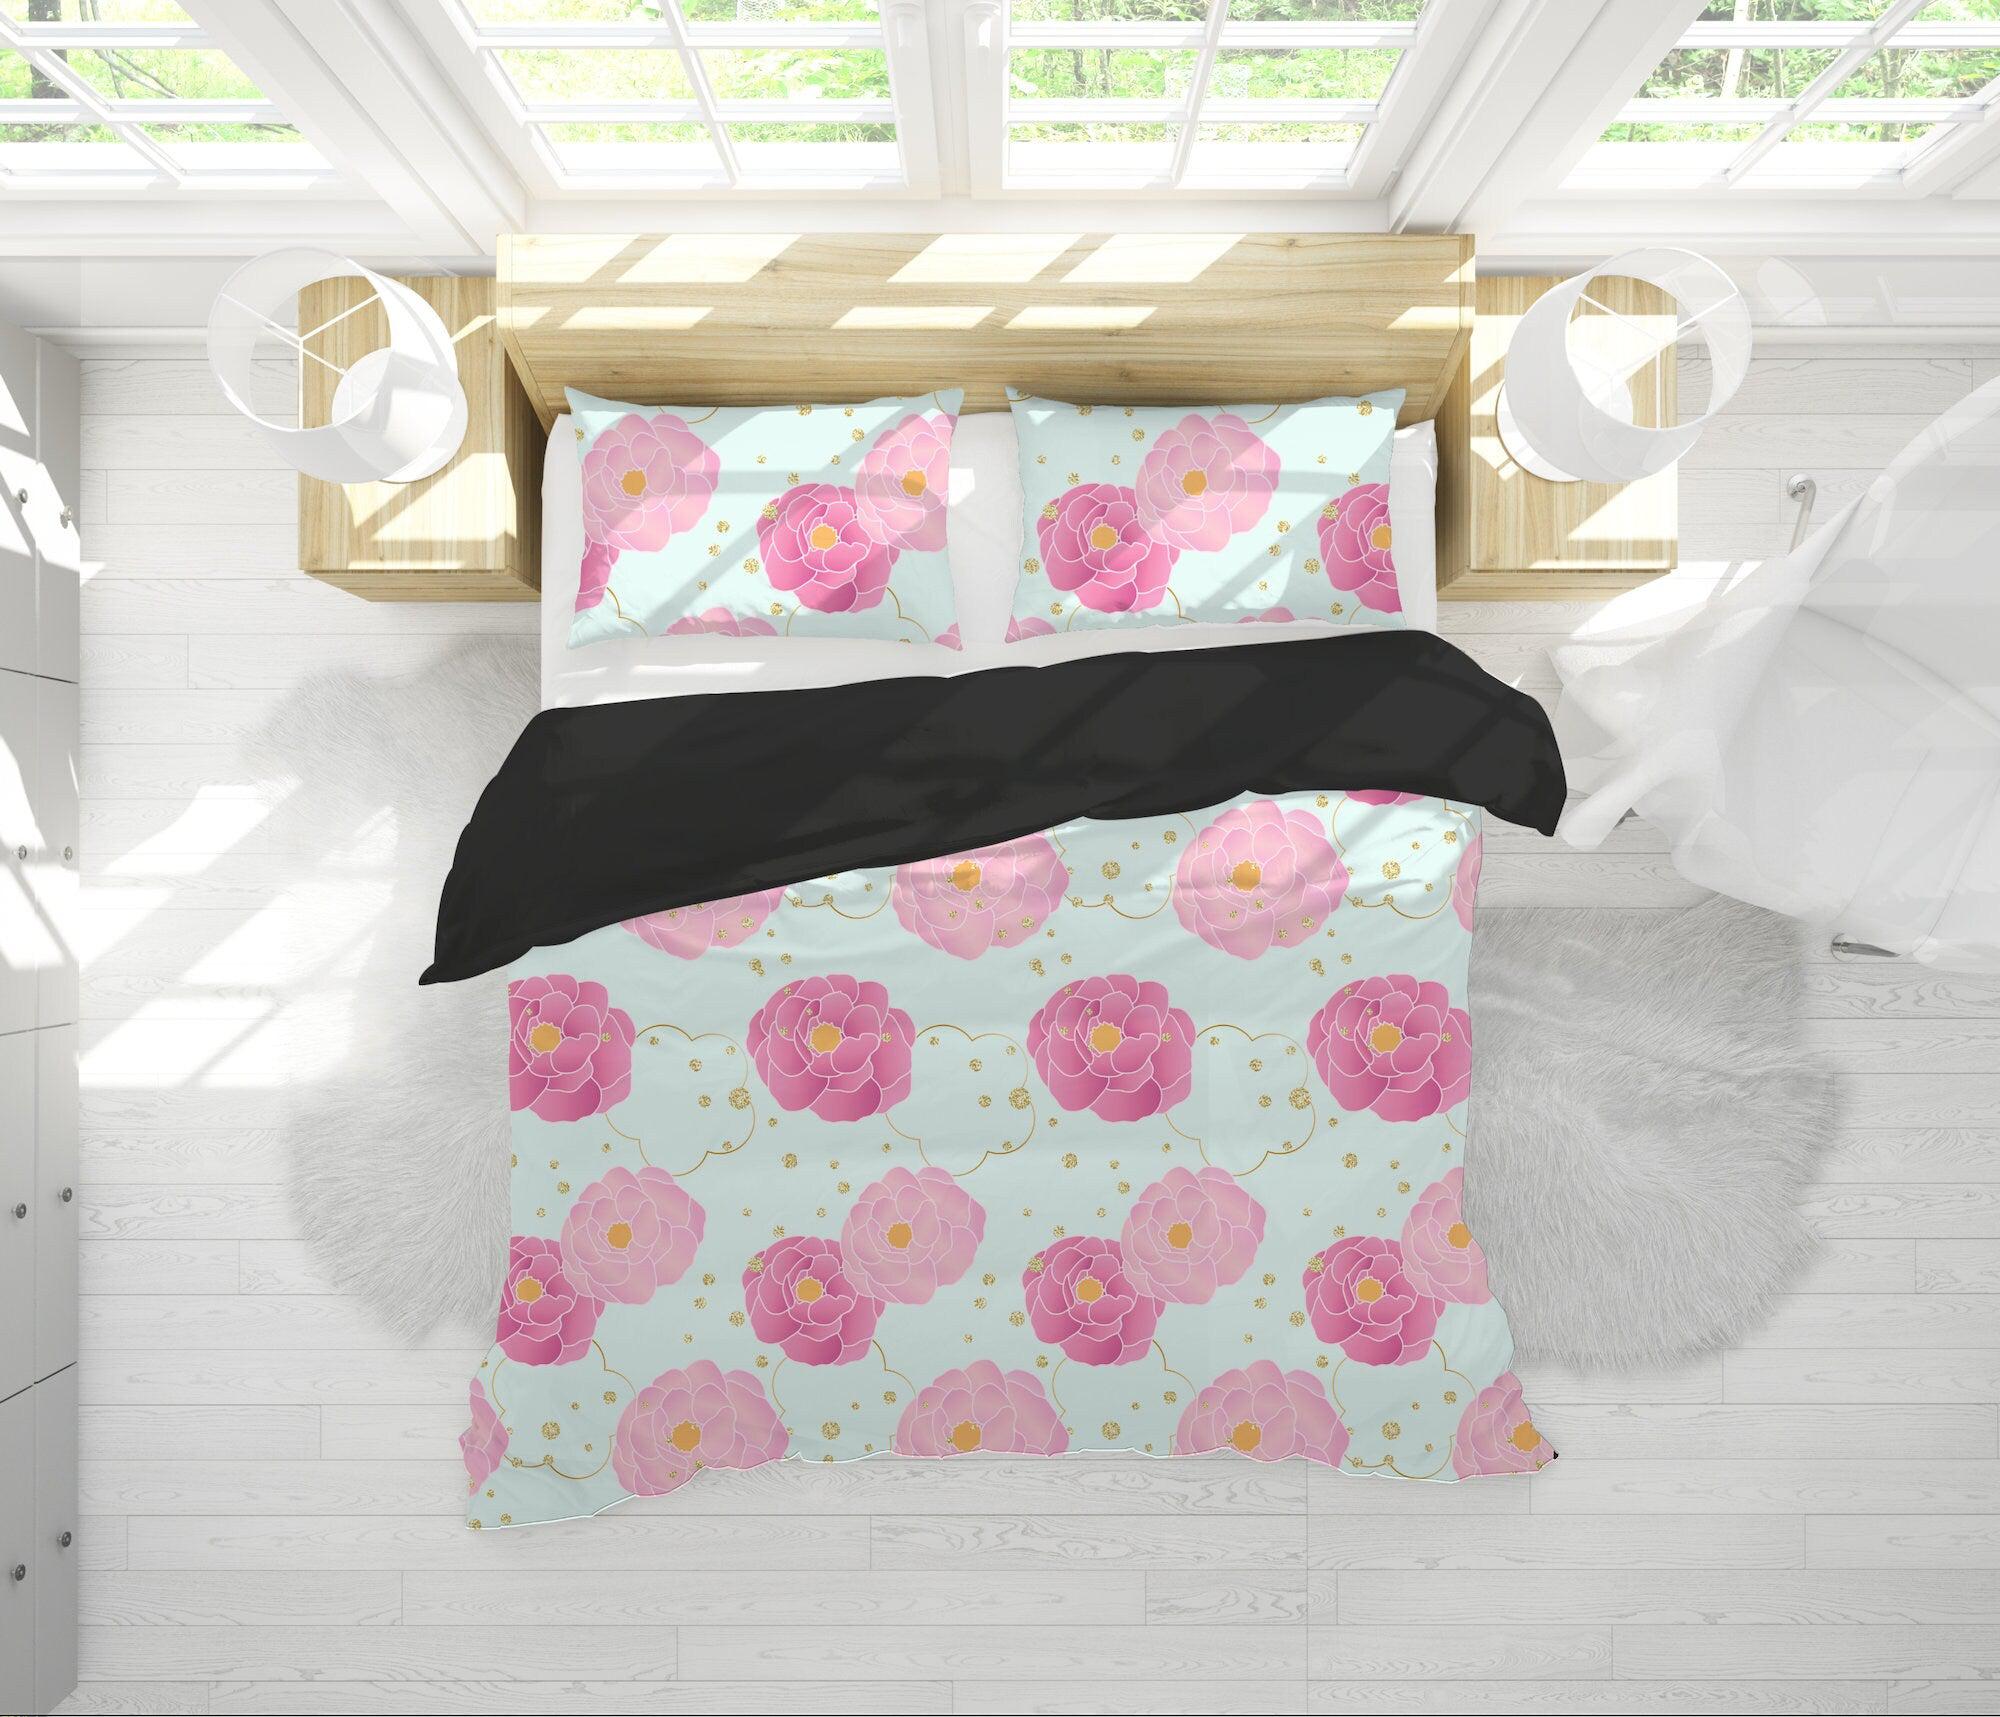 daintyduvet Sky Blue Bedding Set Pink Camellia Flowers, Handmade Colorful Duvet Cover with Pillow Case